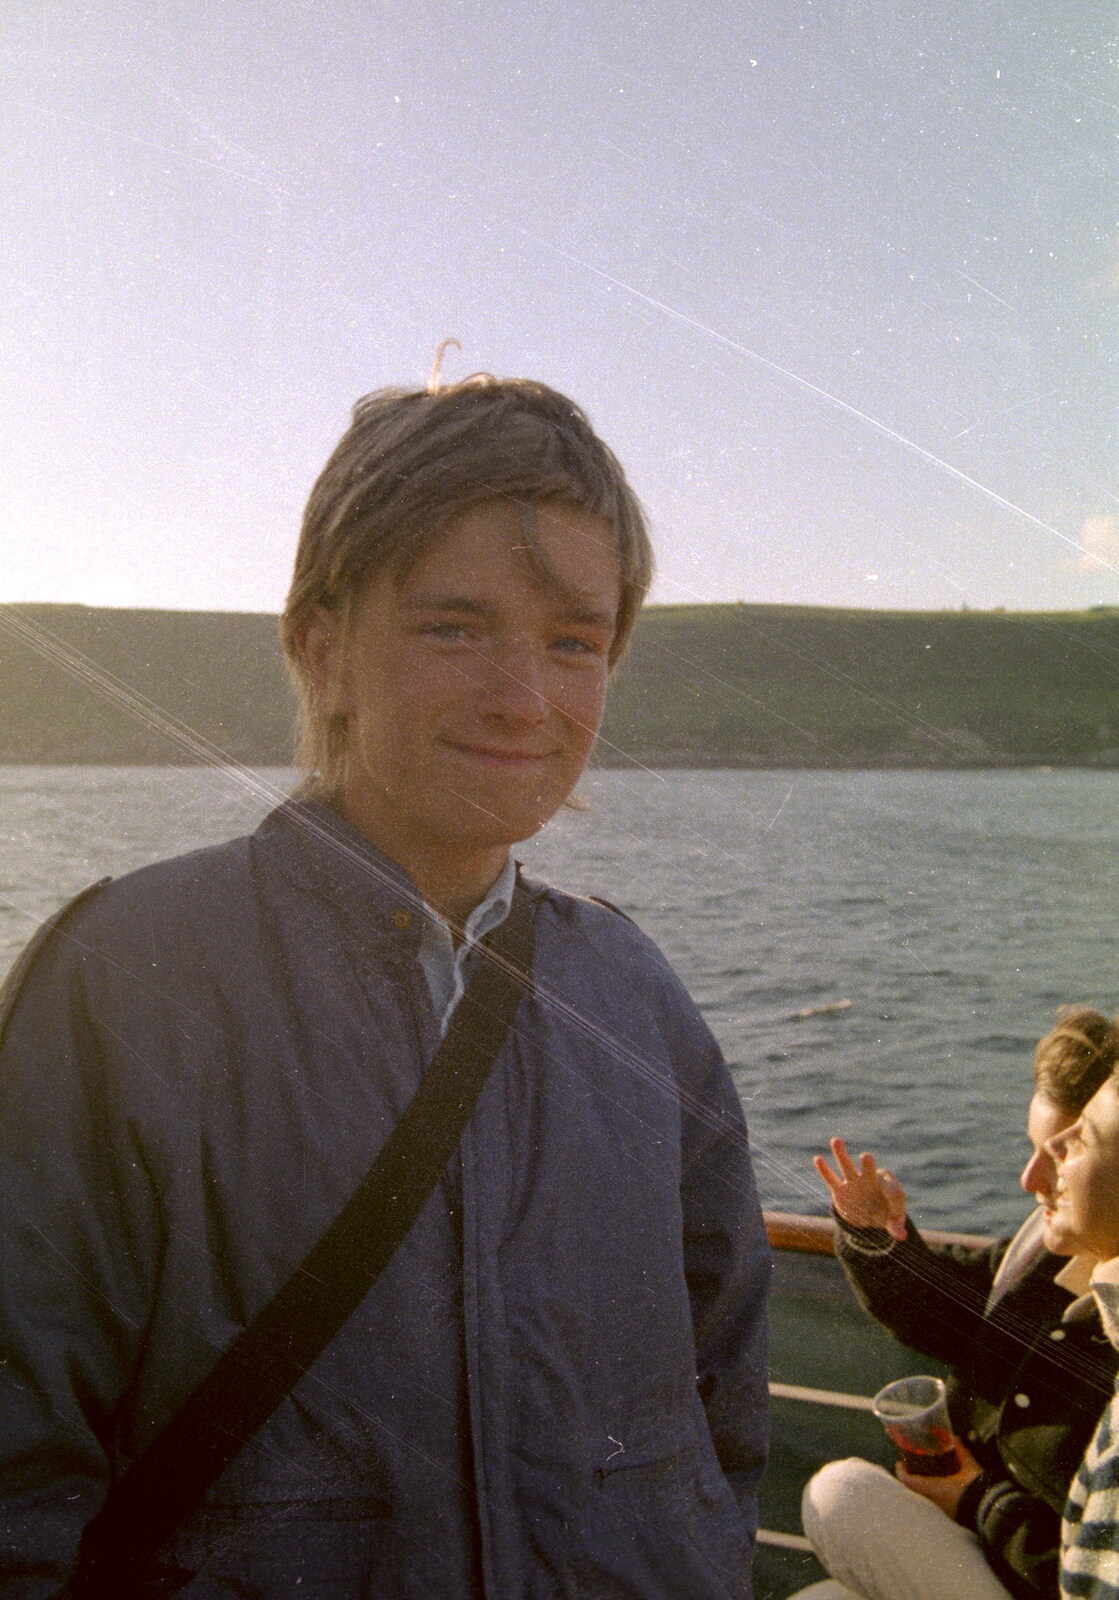 Another nerdy Nosher pic from Uni: A Student Booze Cruise, Plymouth Sound, Devon - 2nd May 1986